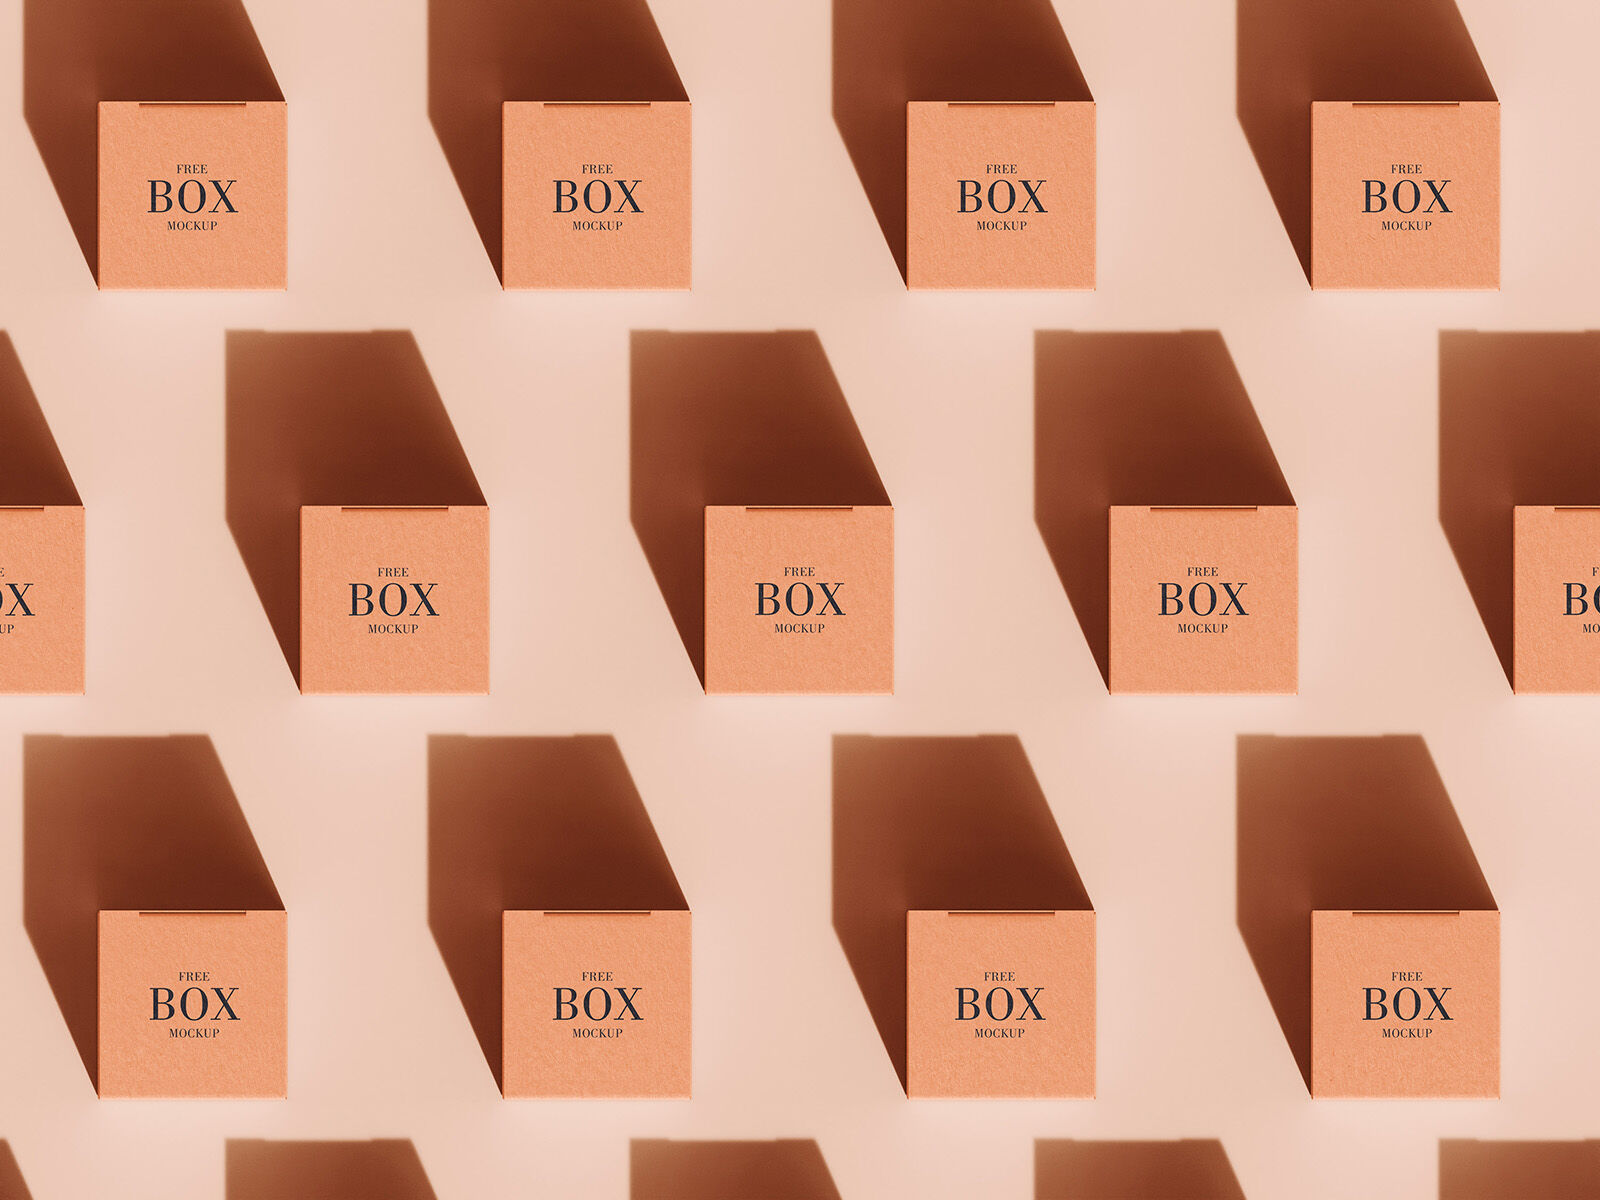 6 Mockups of Packaging Boxes in Grid Layout FREE PSD